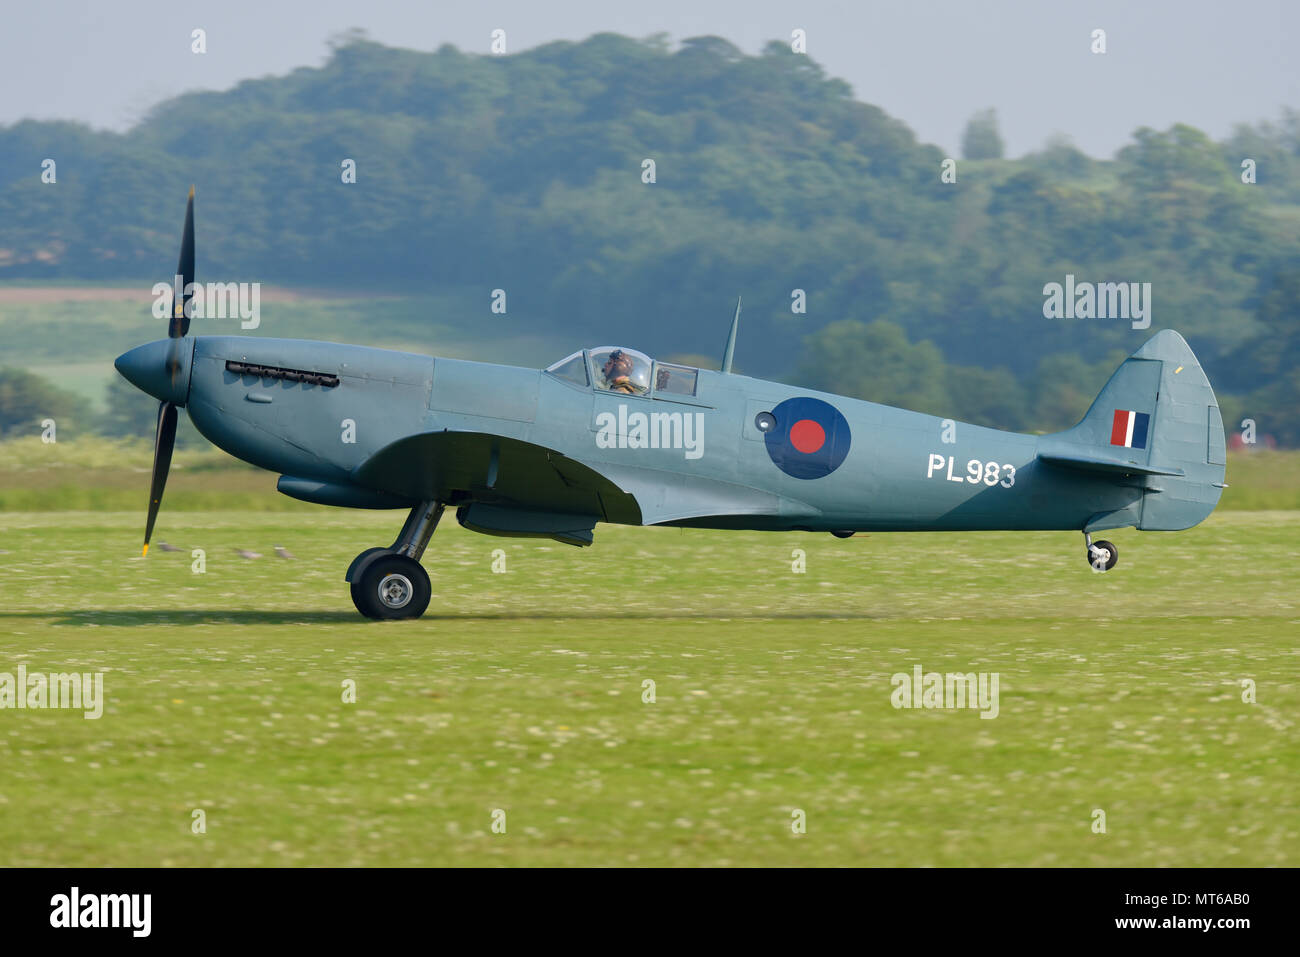 Supermarine Spitfire PRXI PL983 newly restored second world war plane taking off for a test flight from a grass runway Stock Photo